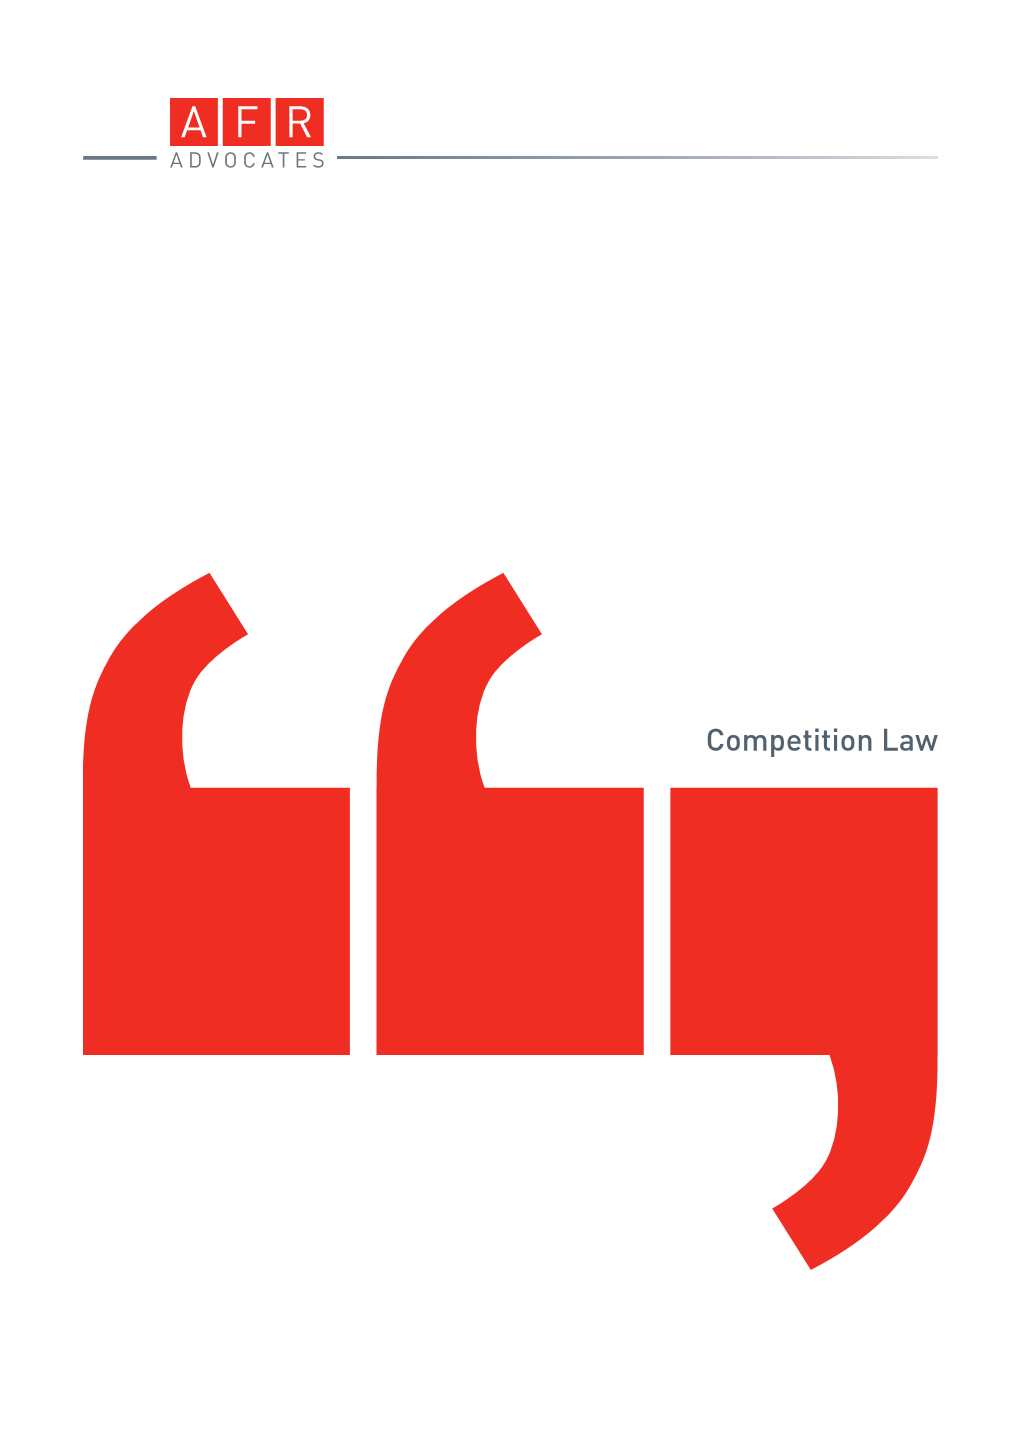 Competition Law Competition Law